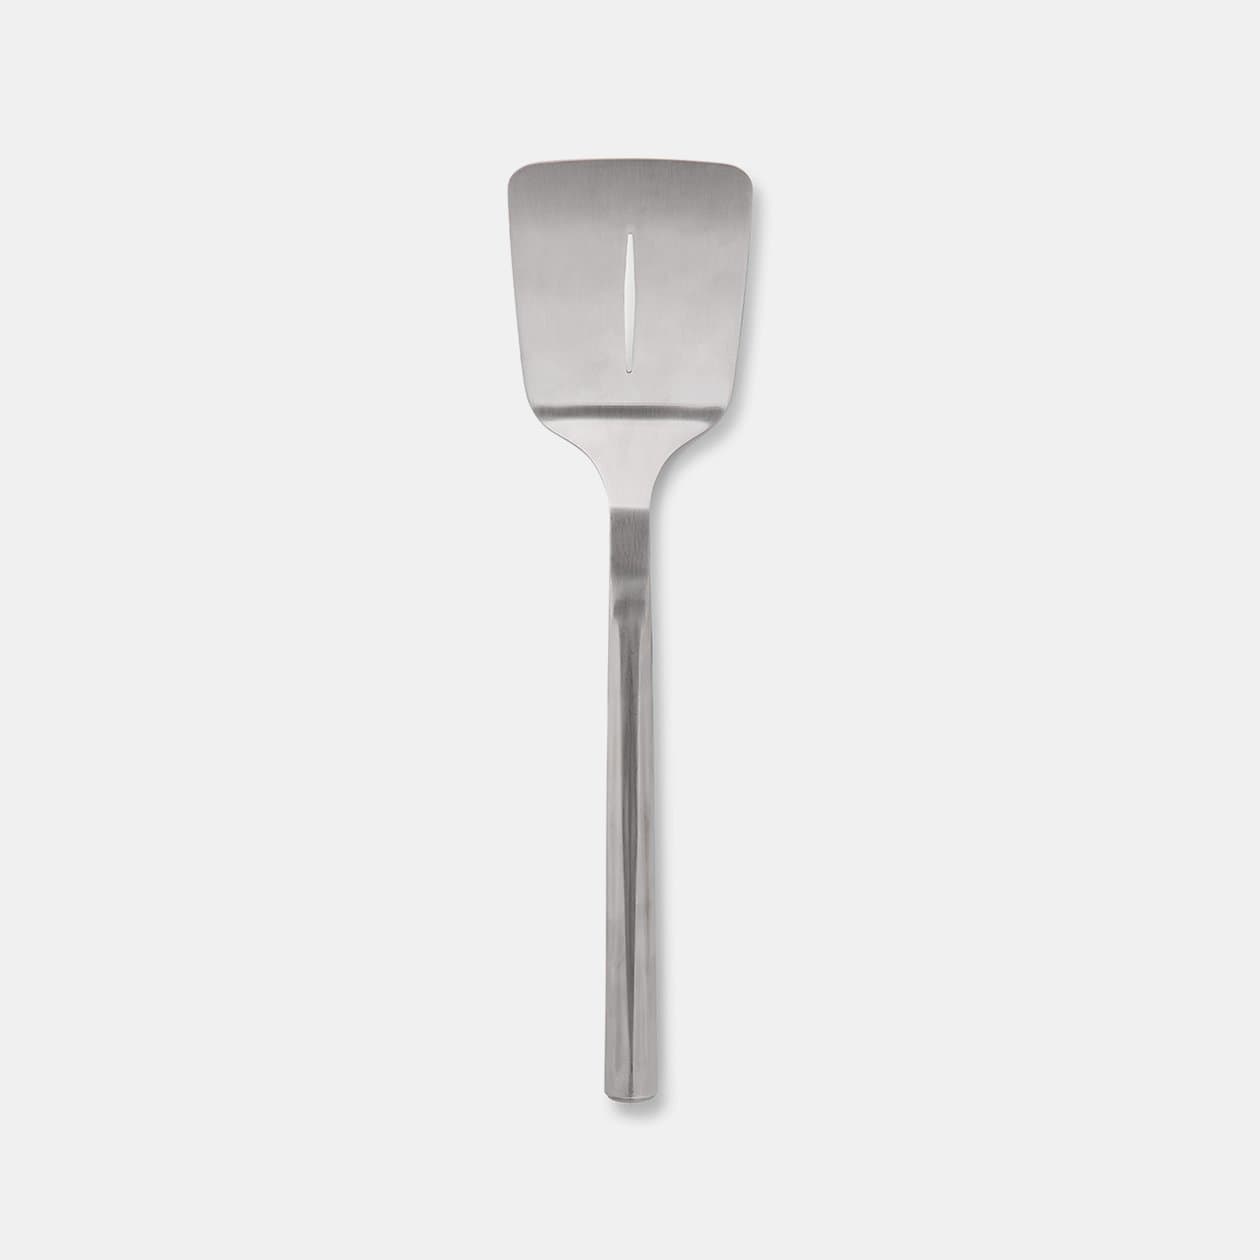 Stainless Steel kitchen Slotted Turner Spatula Kitchen Cooking Tool Utensil  New